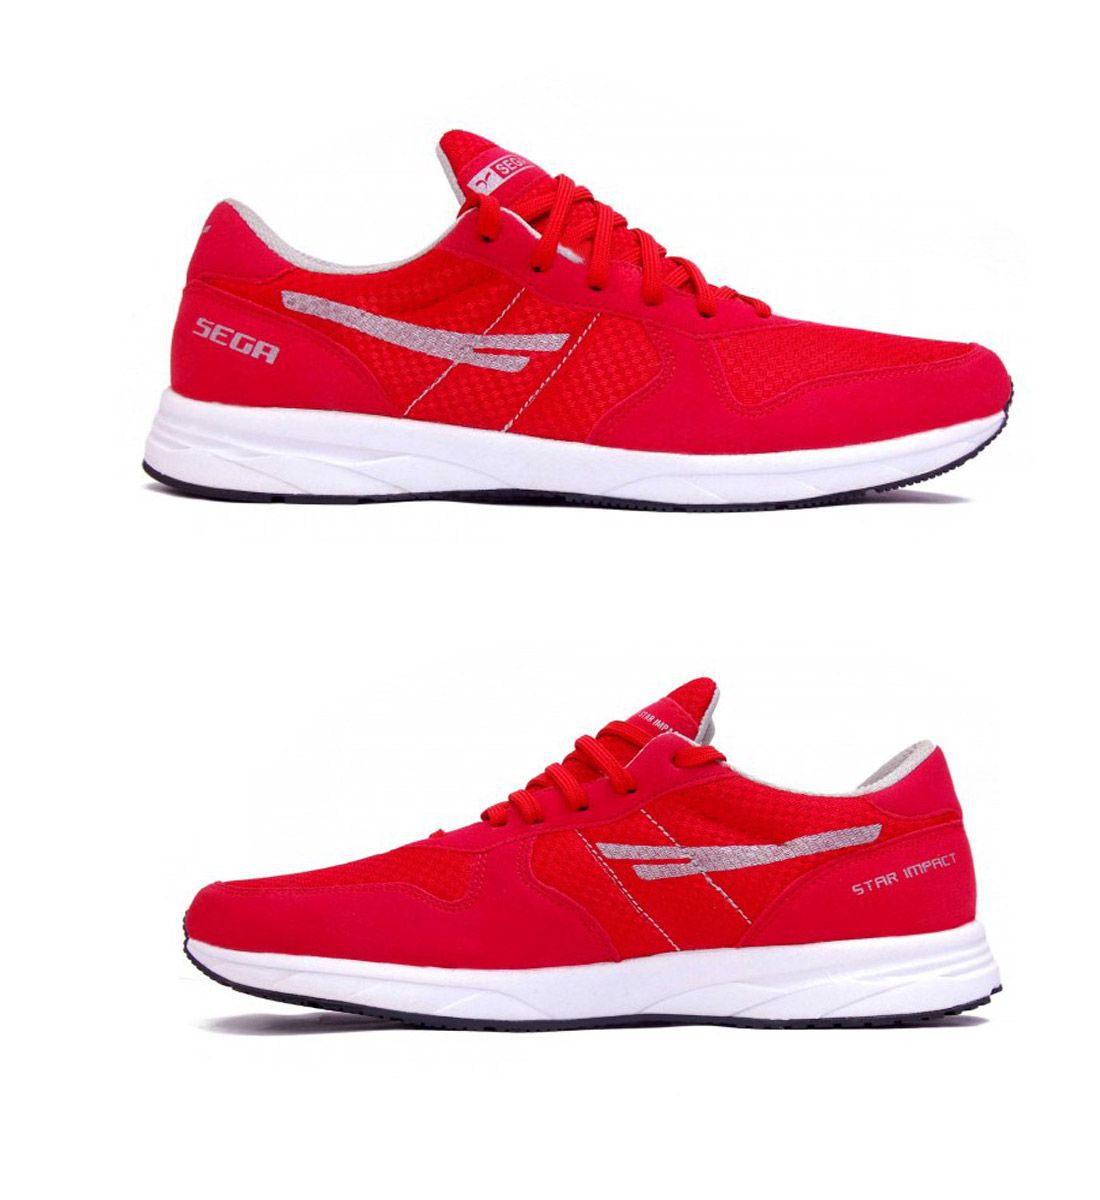 Sega Red Running Shoes Buy Sega Red Running Shoes Online At Best Prices In India On Snapdeal